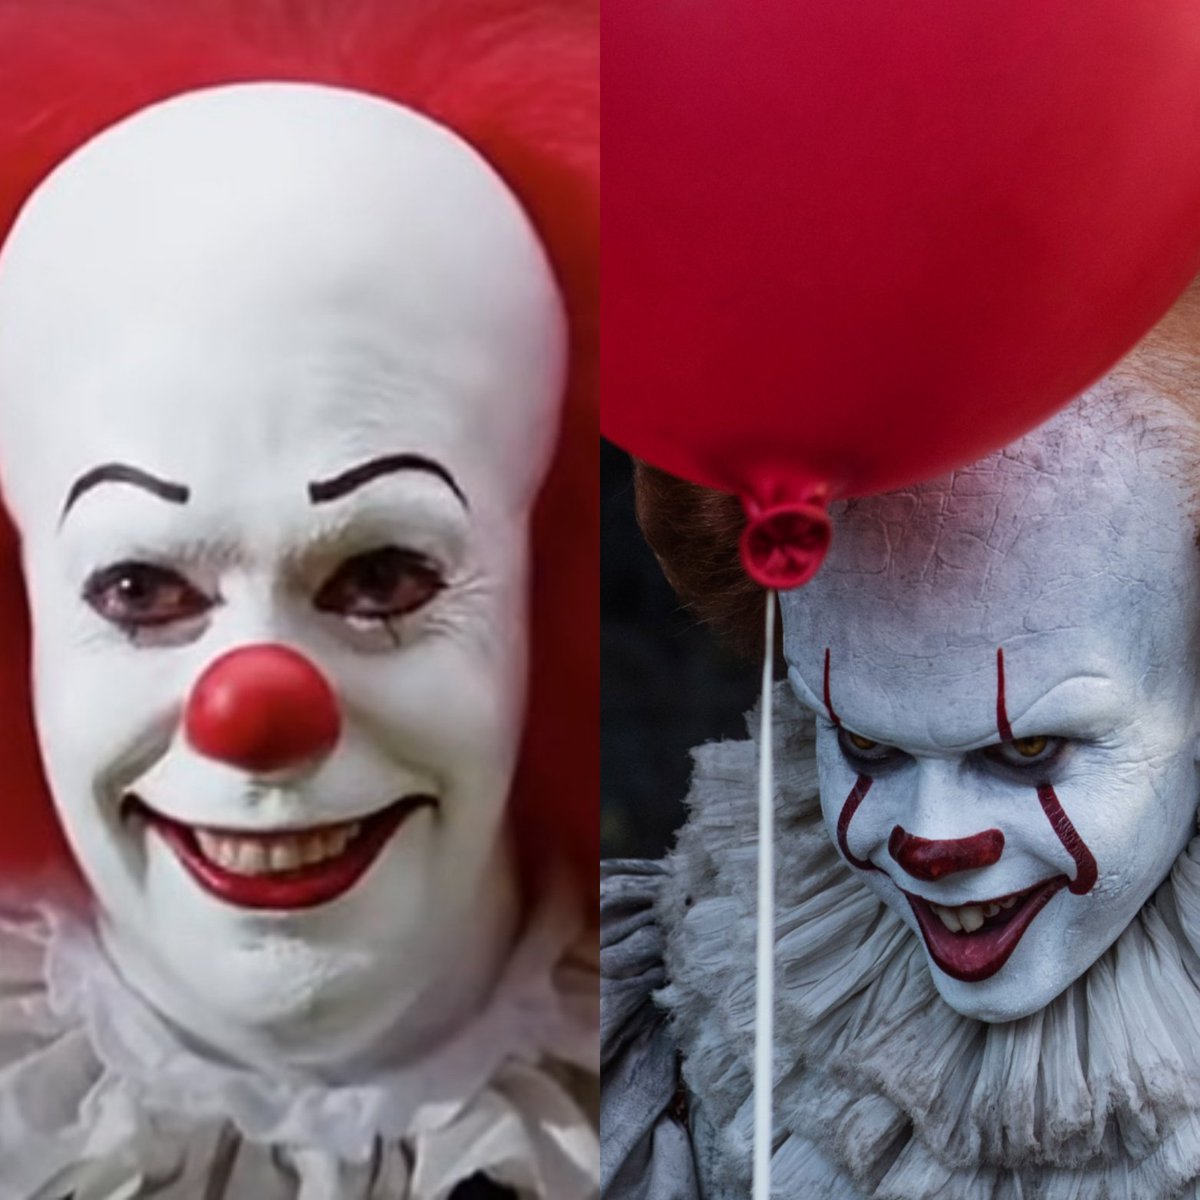 Which version of Pennywise do you prefer??

🎈LINK IN BIO 🎈

#weallfloatdownhere #IT #Pennywise #losersclub #PodernFamily #newepisode #podcast #nowlistening #PodcastRecommendations #horror #HorrorMovies #horrorfamily #timcurry #billskarsgard #StephenKing #FilmTwitter